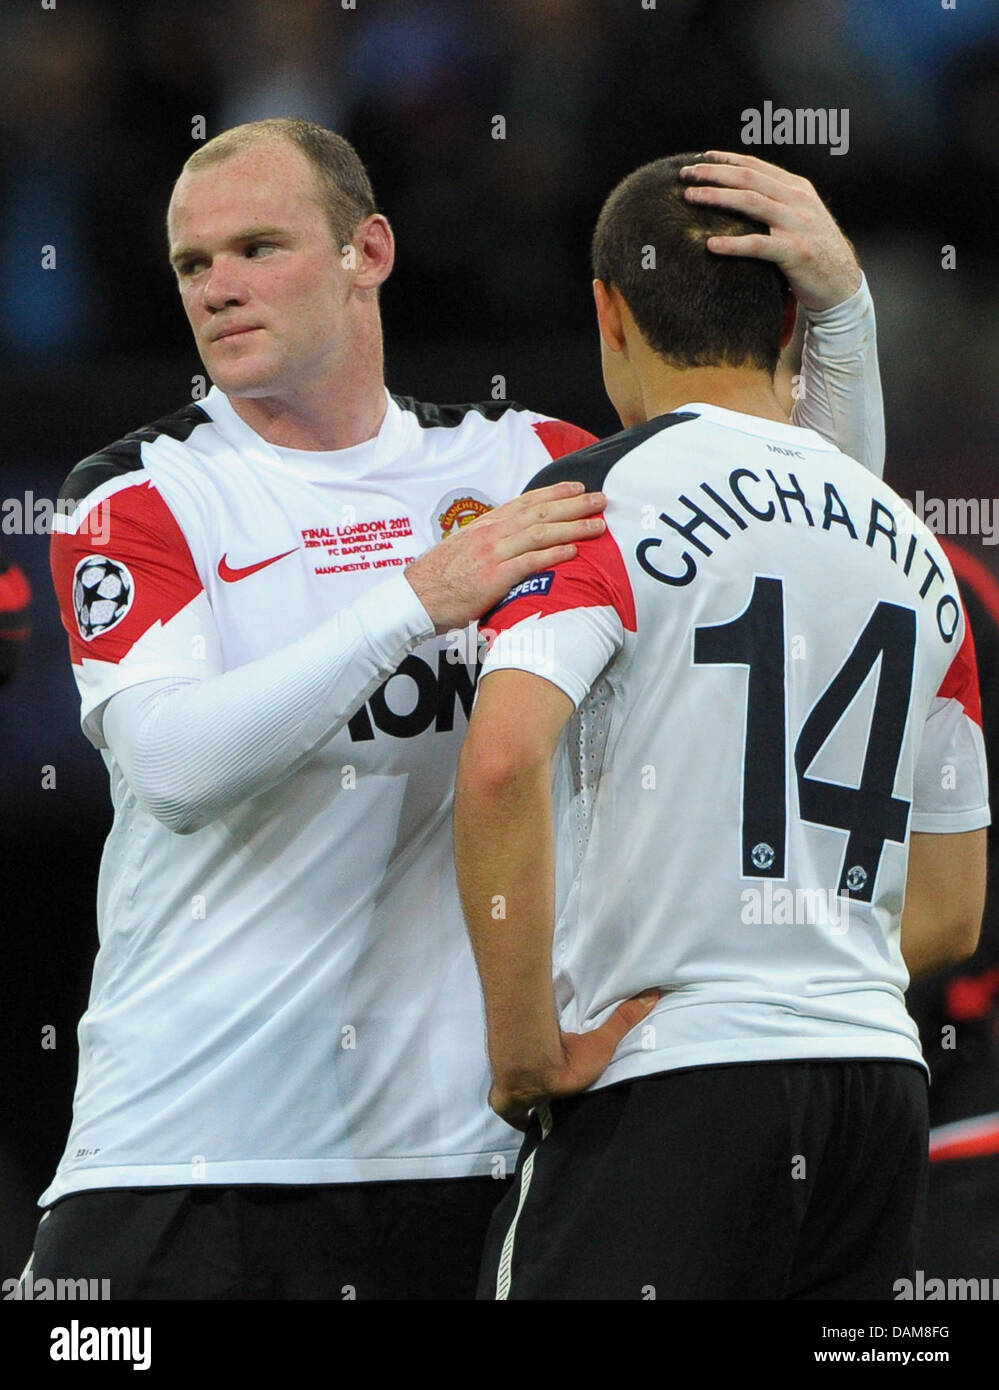 Manchester's Wayne Rooney (L) and Javier Hernandez react after loosing the UEFA Champions League final between FC Barcelona and Manchester United at the Wembley Stadium, London, Britain, 28 May 2011. Photo: Soeren Stache Stock Photo